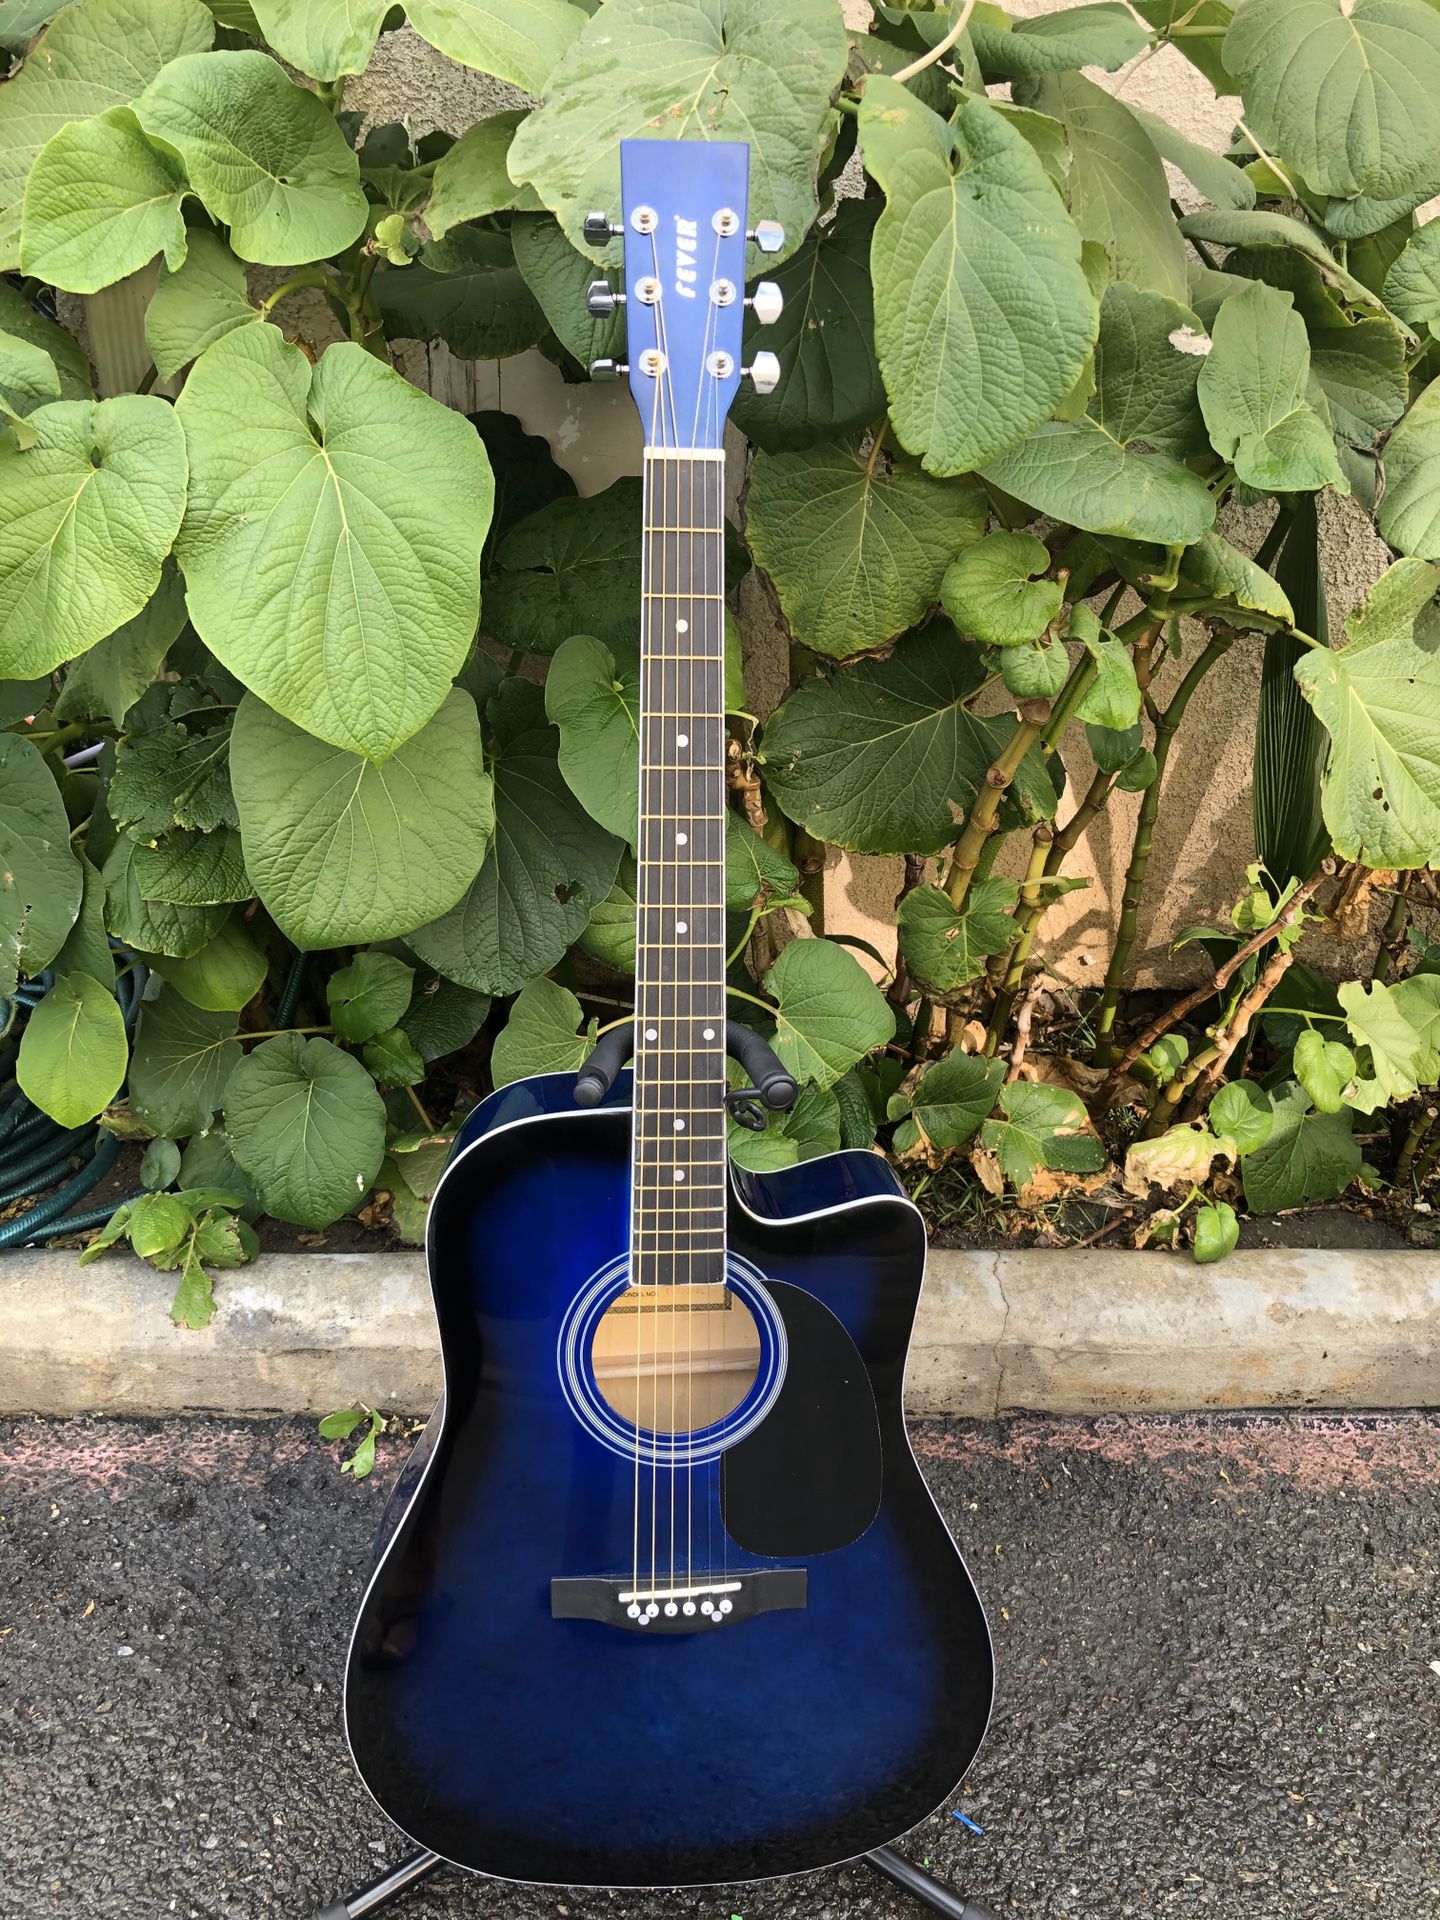 Fever classic acoustic guitar with metal strings